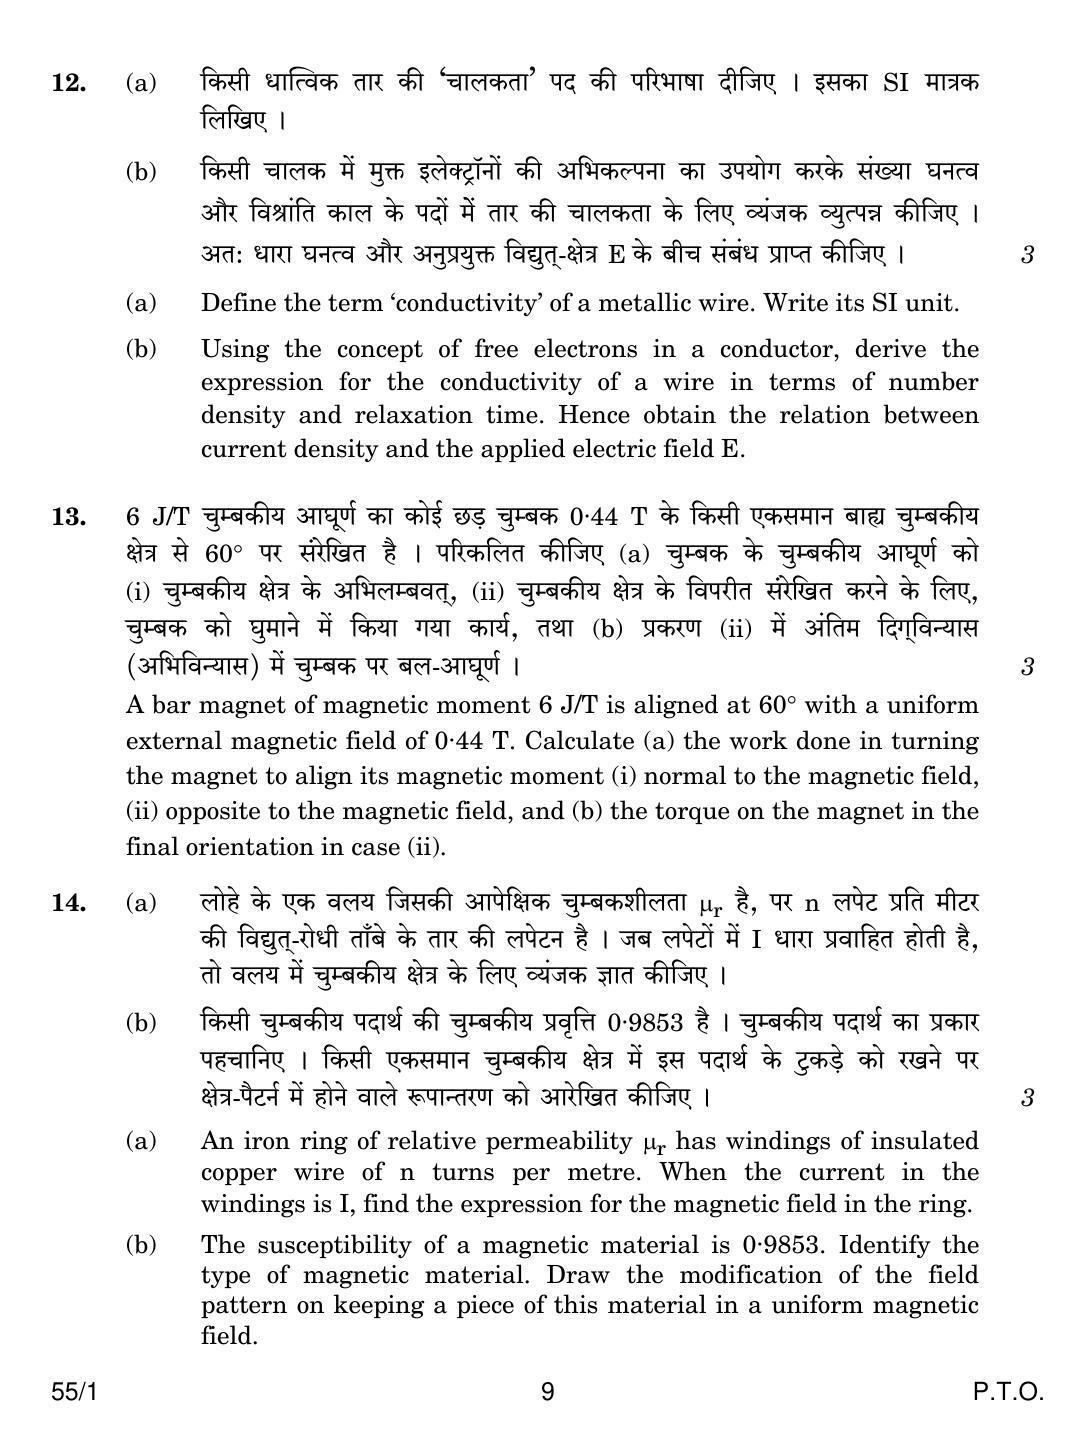 CBSE Class 12 55-1 PHYSICS 2018 Question Paper - Page 9